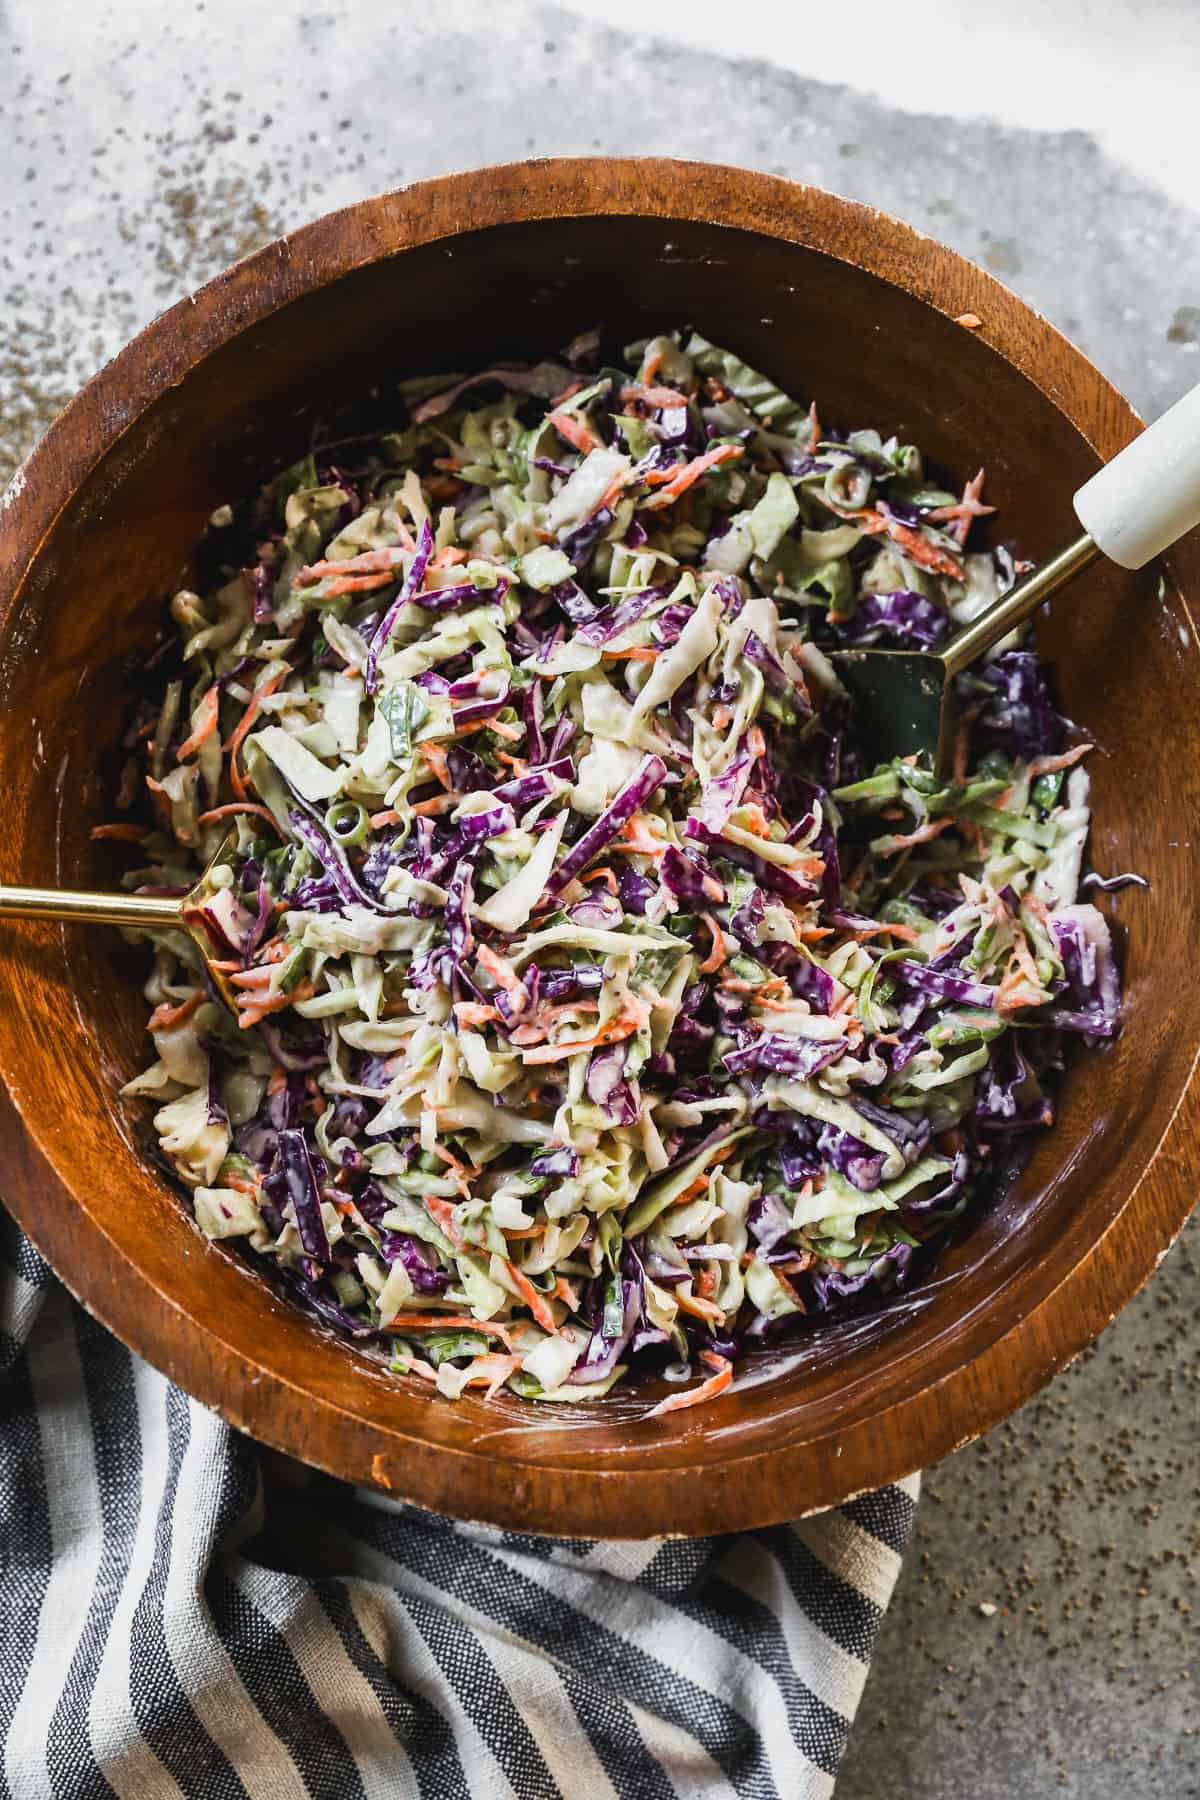 The best Coleslaw recipe with crunchy cabbage, green onions, carrots, and a creamy homemade dressing all tossed in a wooden bowl and ready to serve.